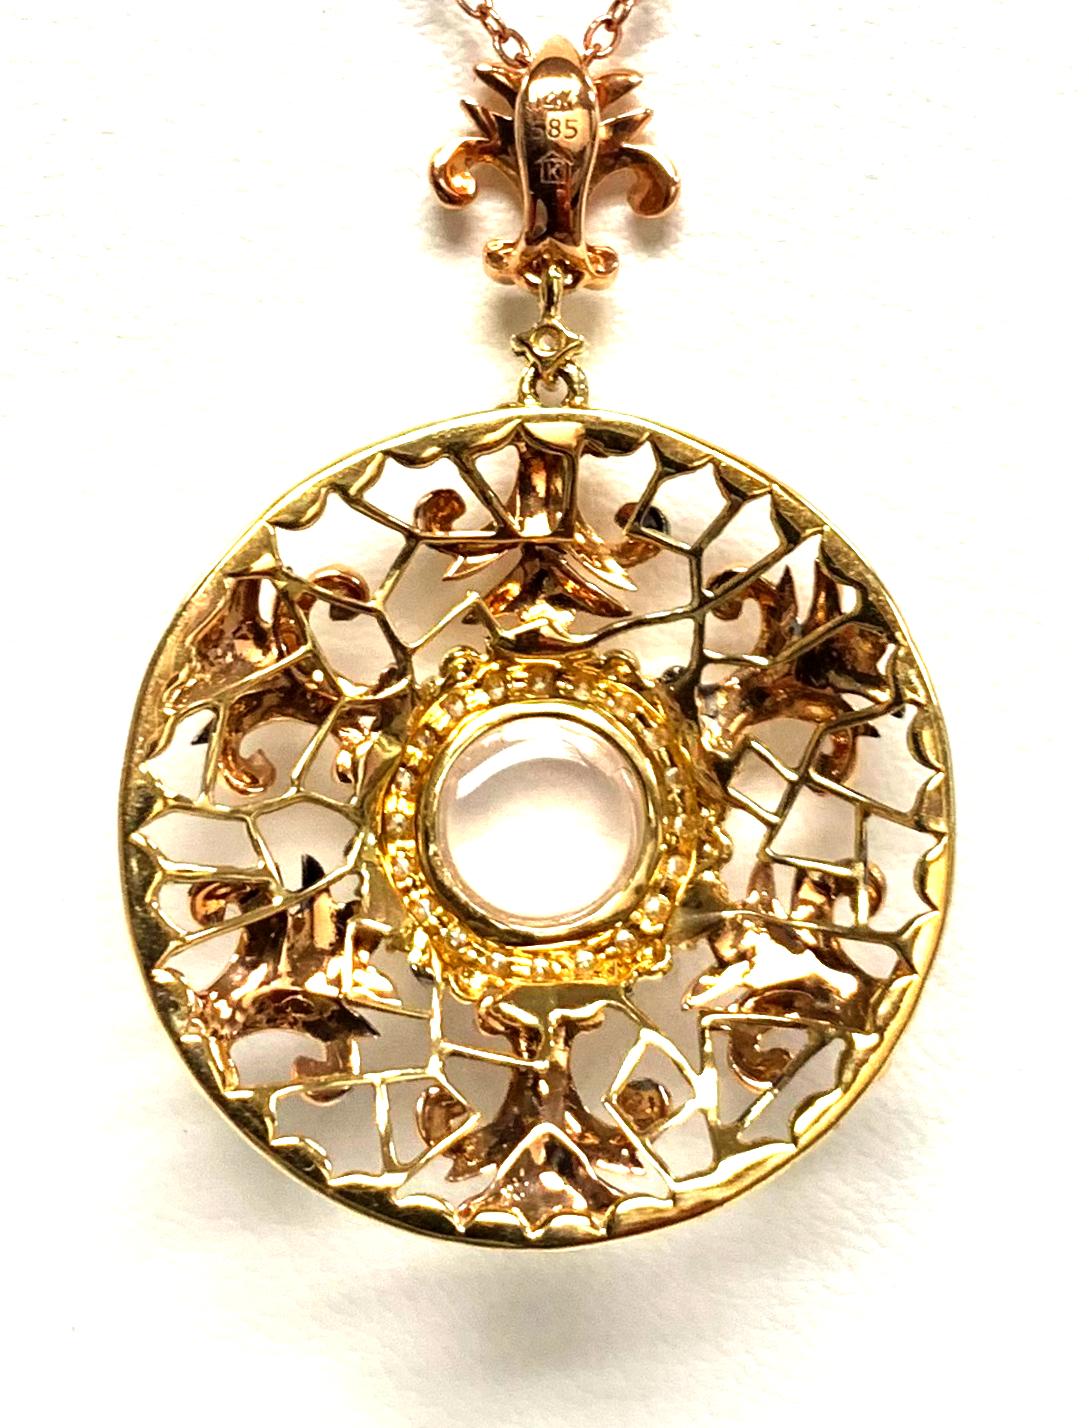 This intricately designed pendant features a 1.78 carat round moonstone cabochon at the center of a diamond studded halo and framed by beautiful 14k rose gold accents. The moonstone exhibits mesmerizing adularescence, or 